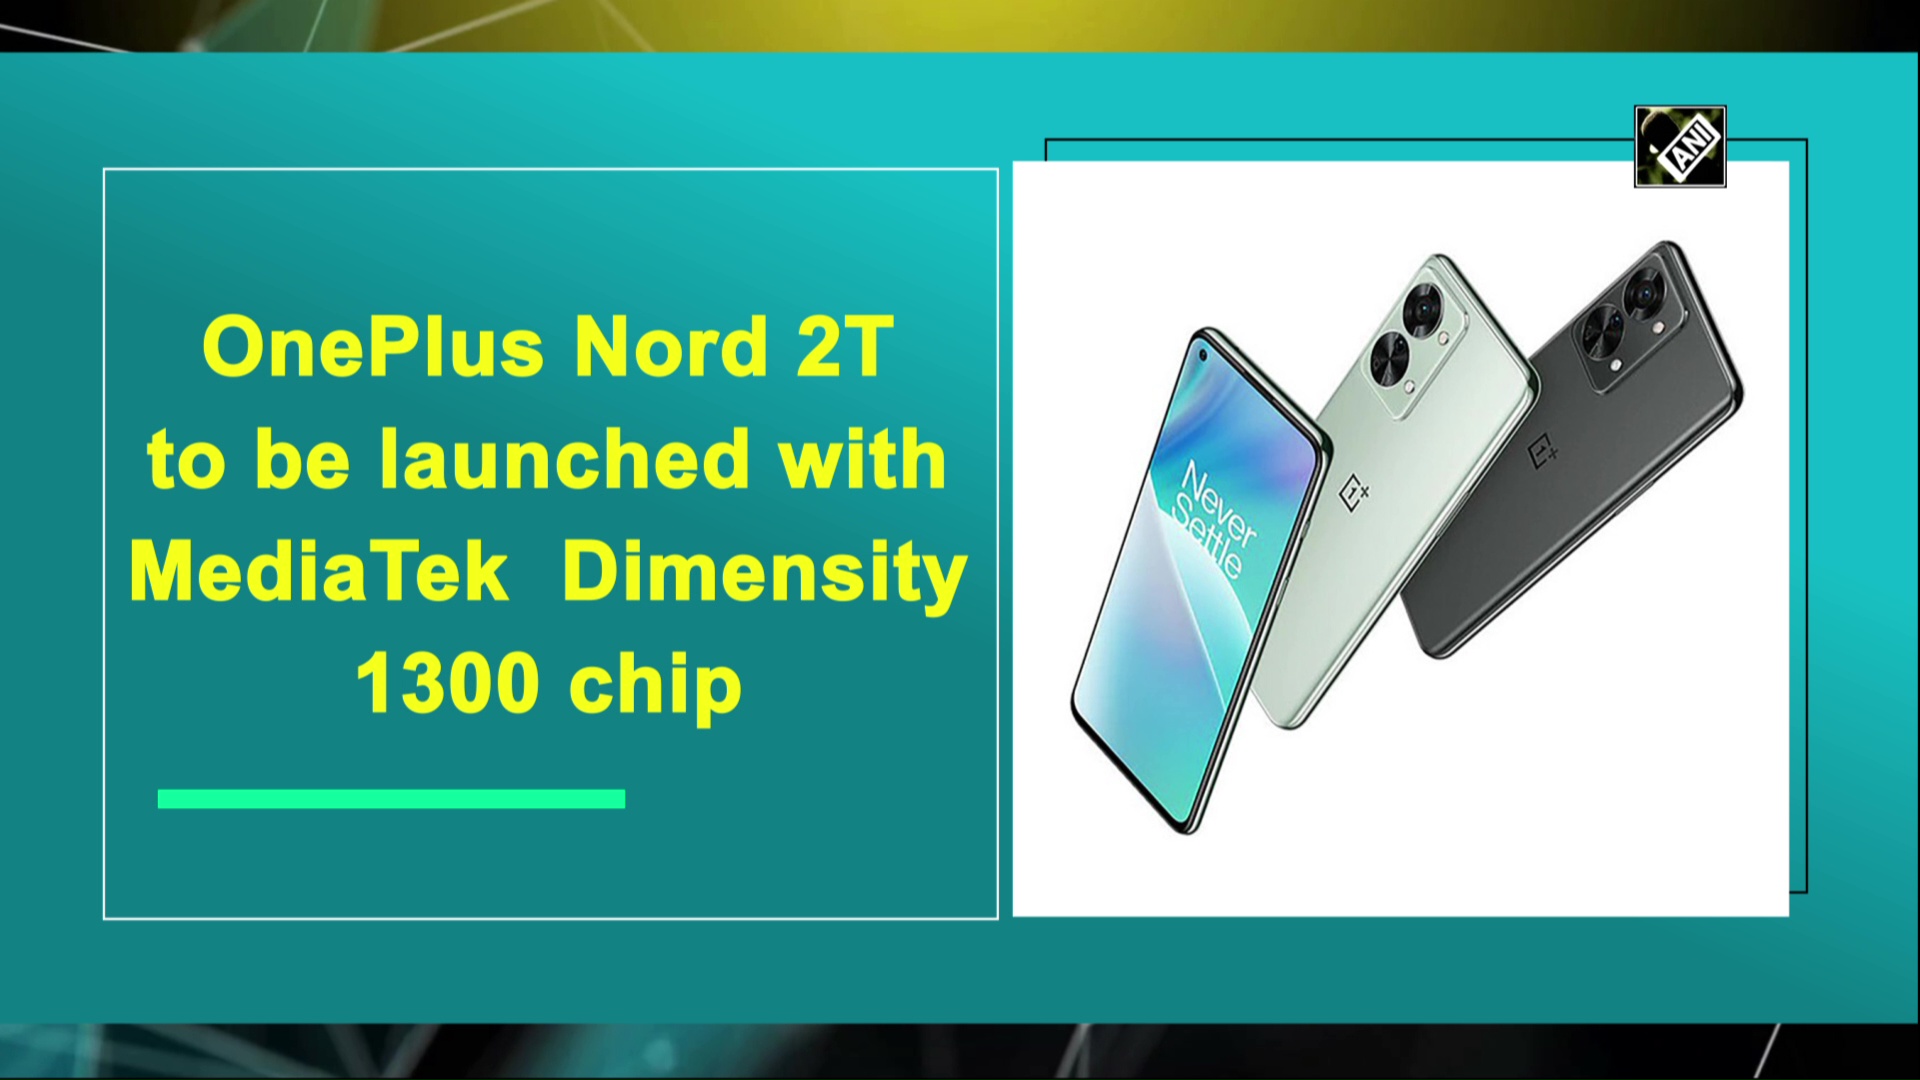 OnePlus Nord 2T to be launched with MediaTek  Dimensity 1300 chip